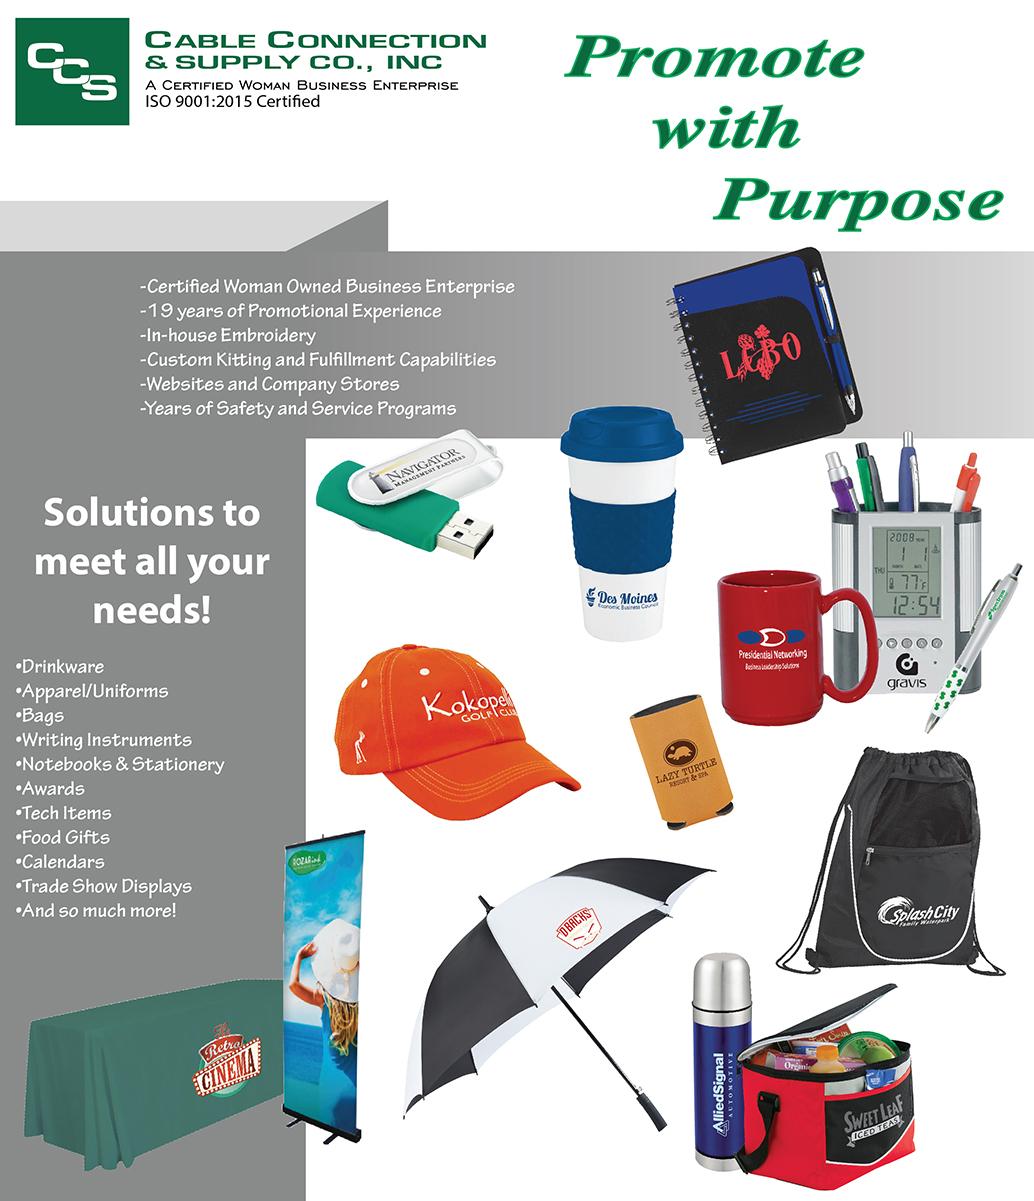 Image: Flyer with promotional items